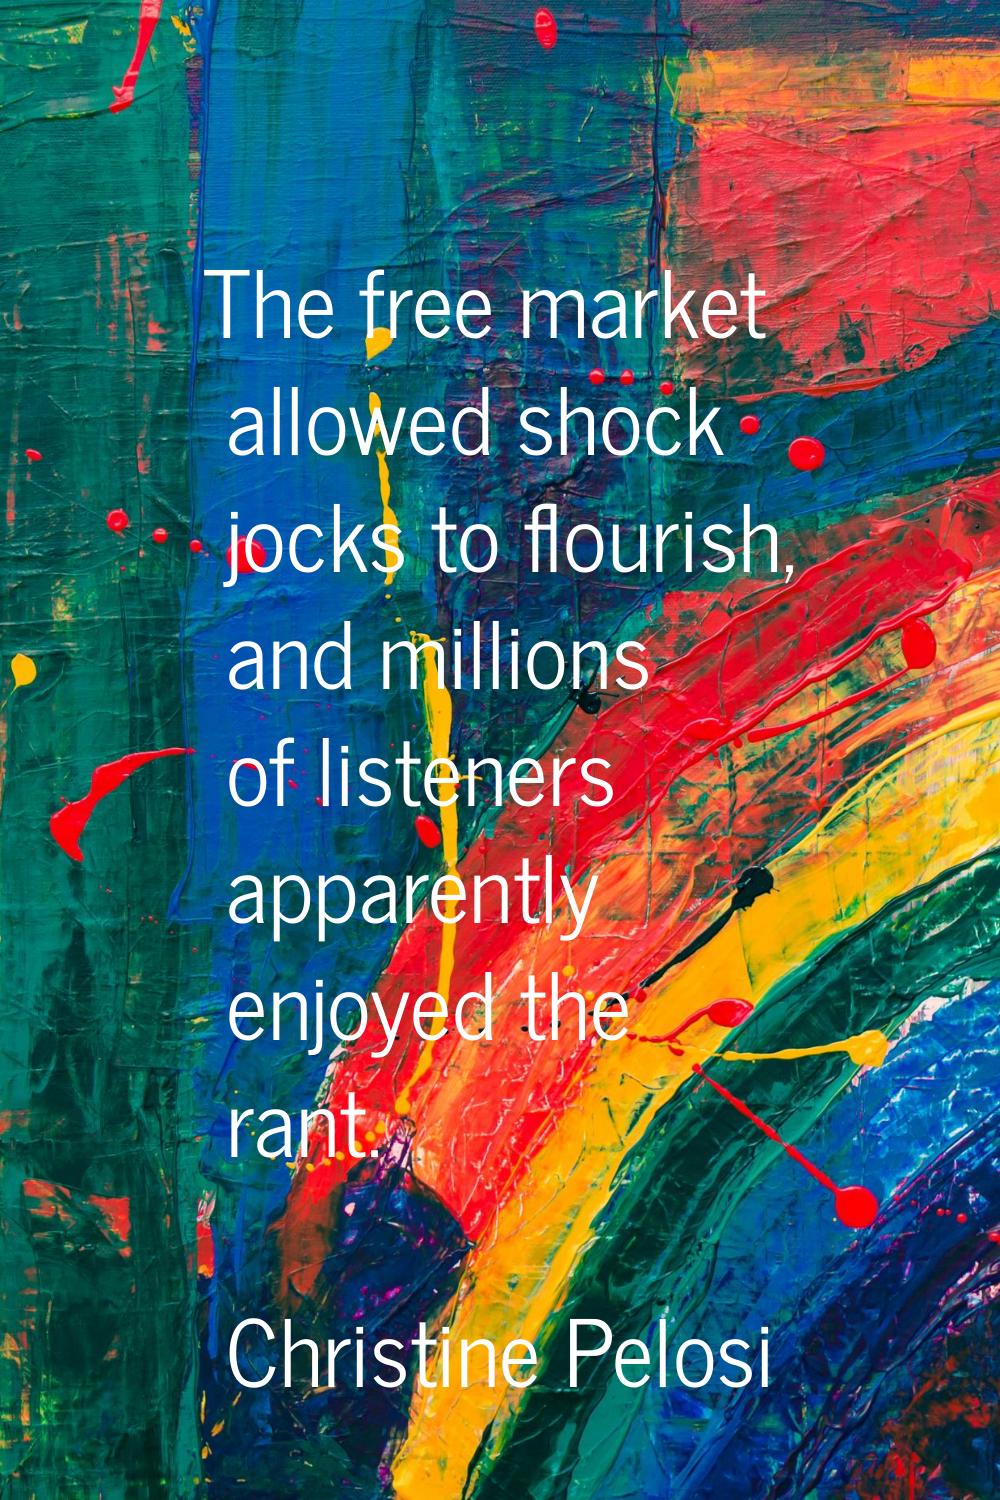 The free market allowed shock jocks to flourish, and millions of listeners apparently enjoyed the r